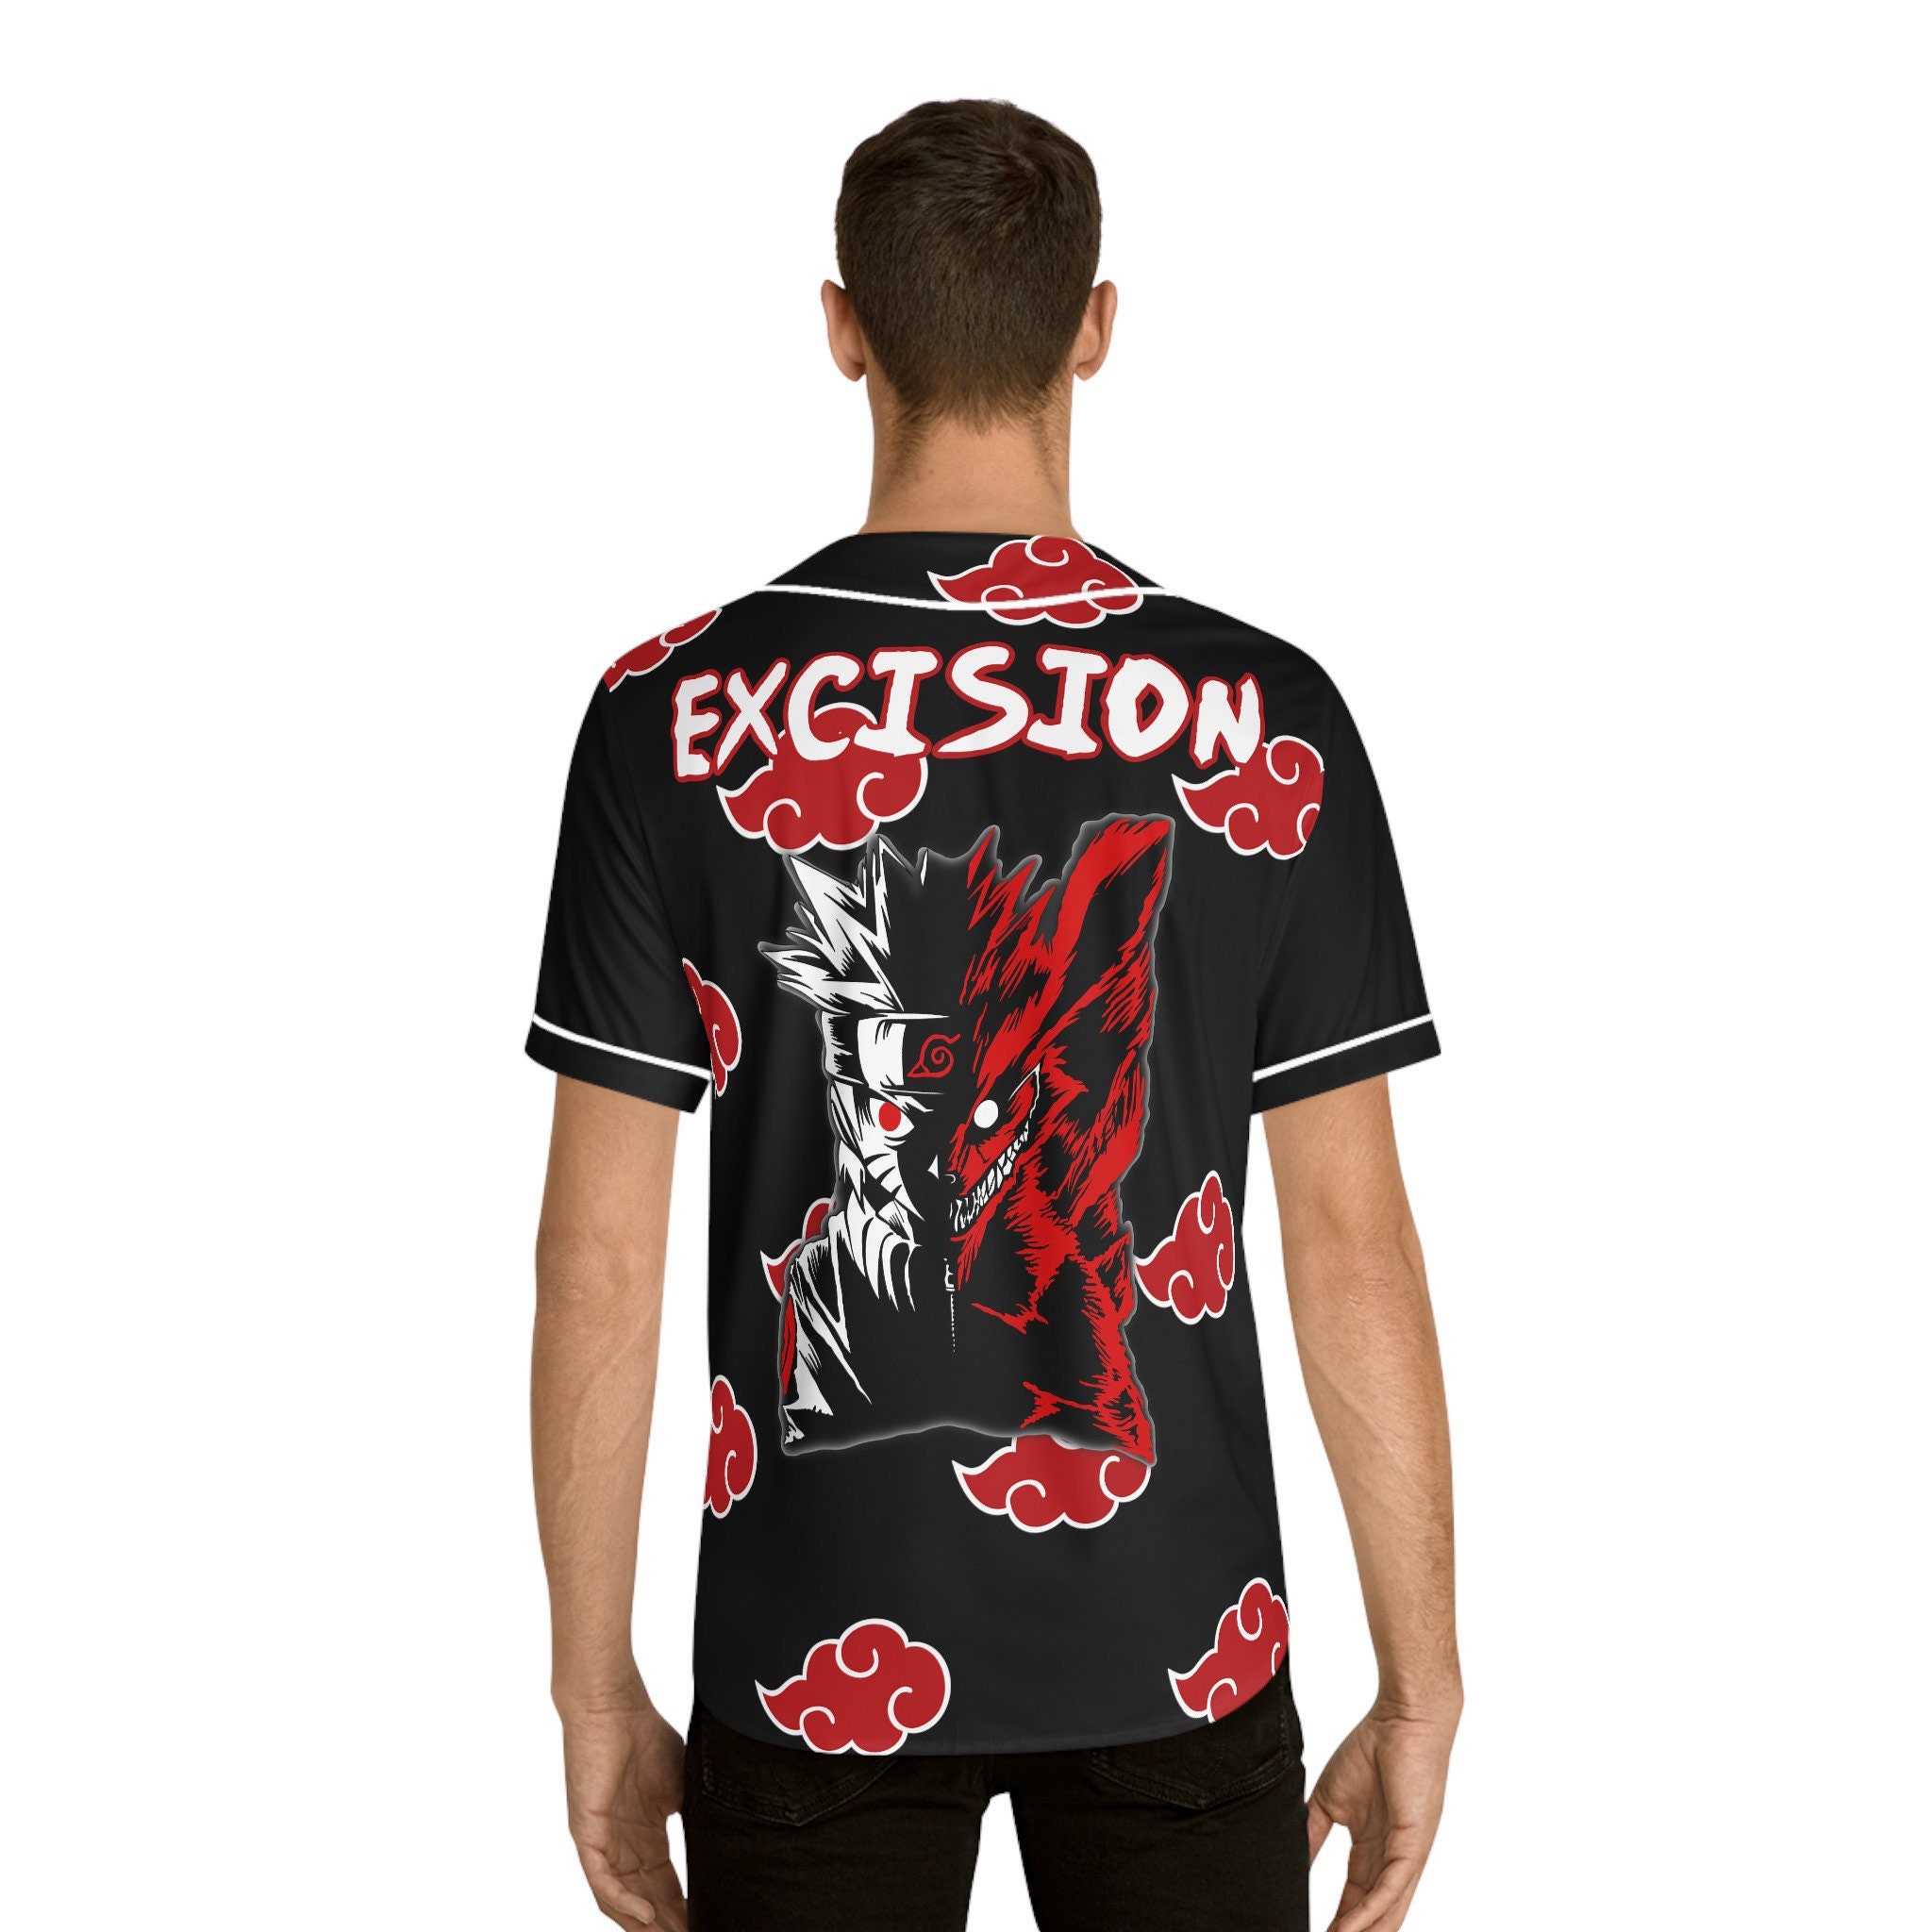 Excision Jersey black Sleeves - Etsy